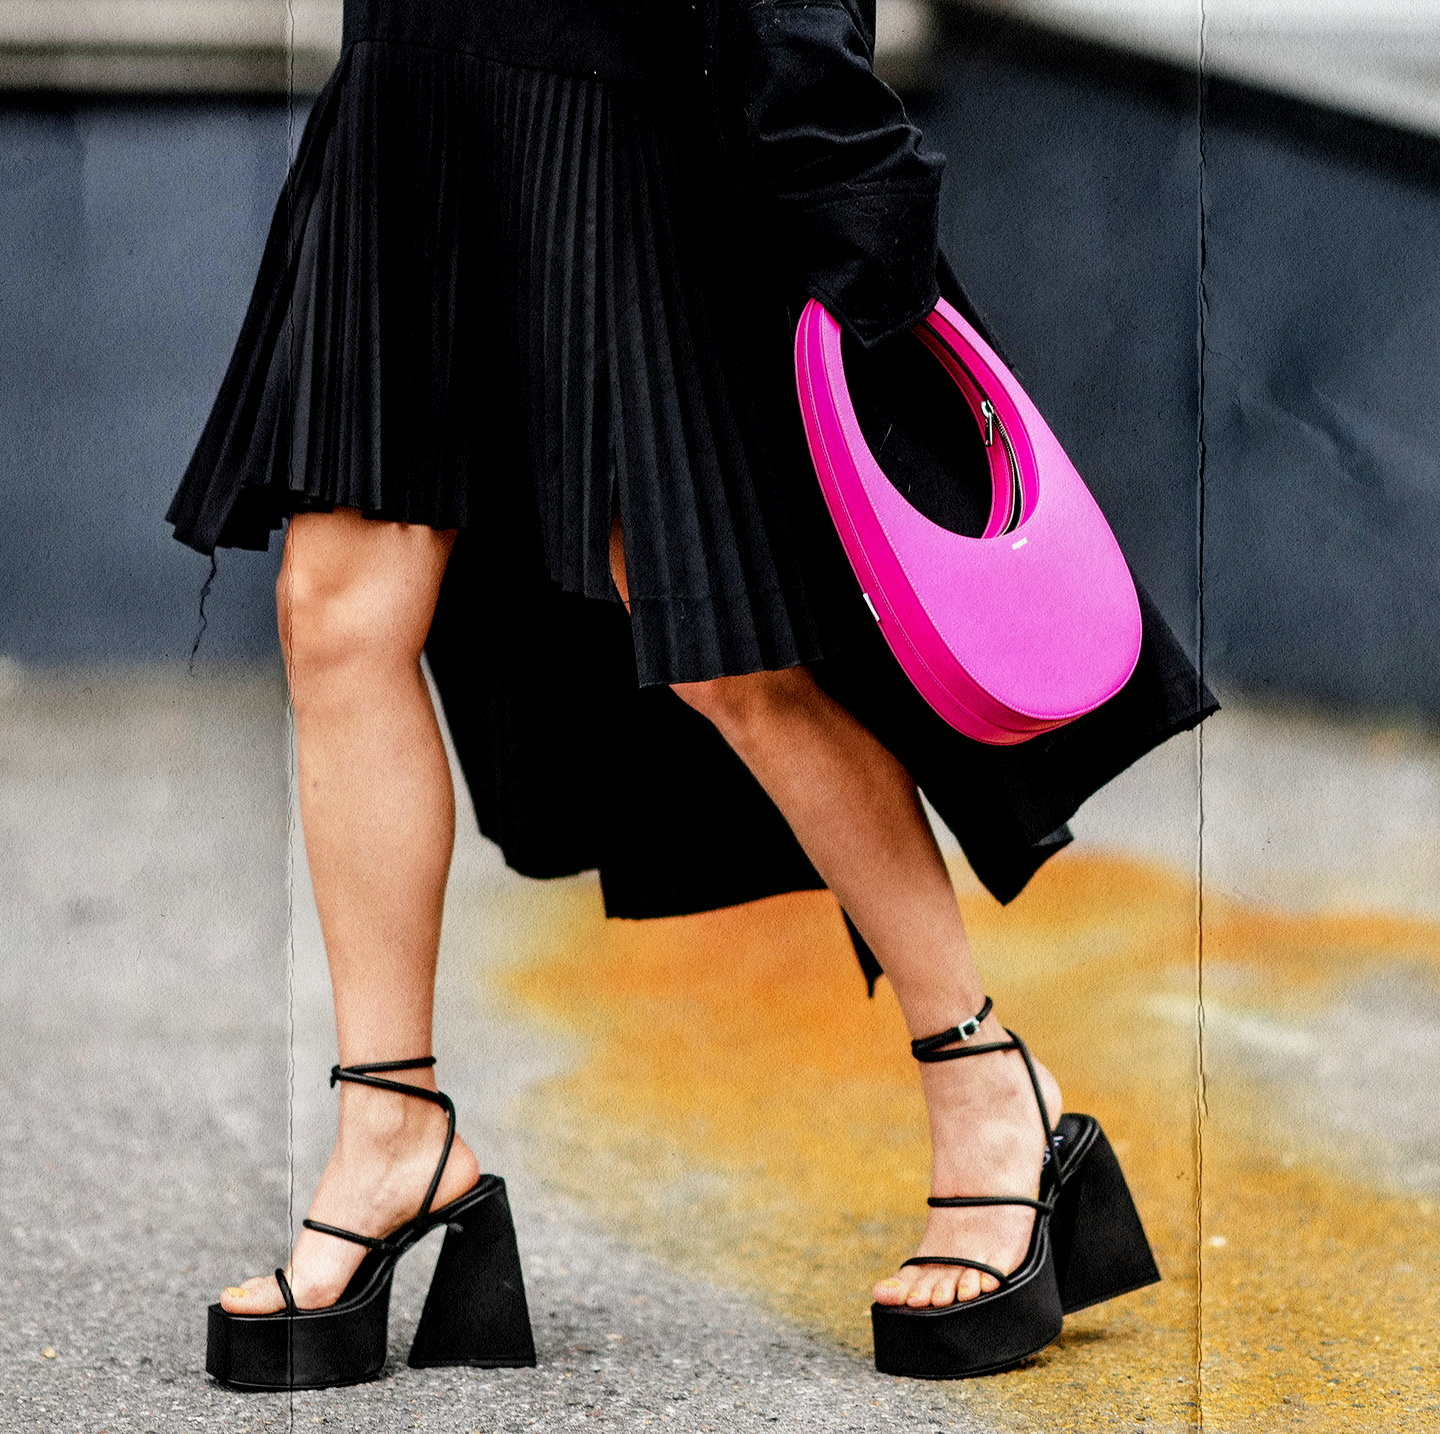 18 Perfect Platform Sandals to Make You The Center Of Attention